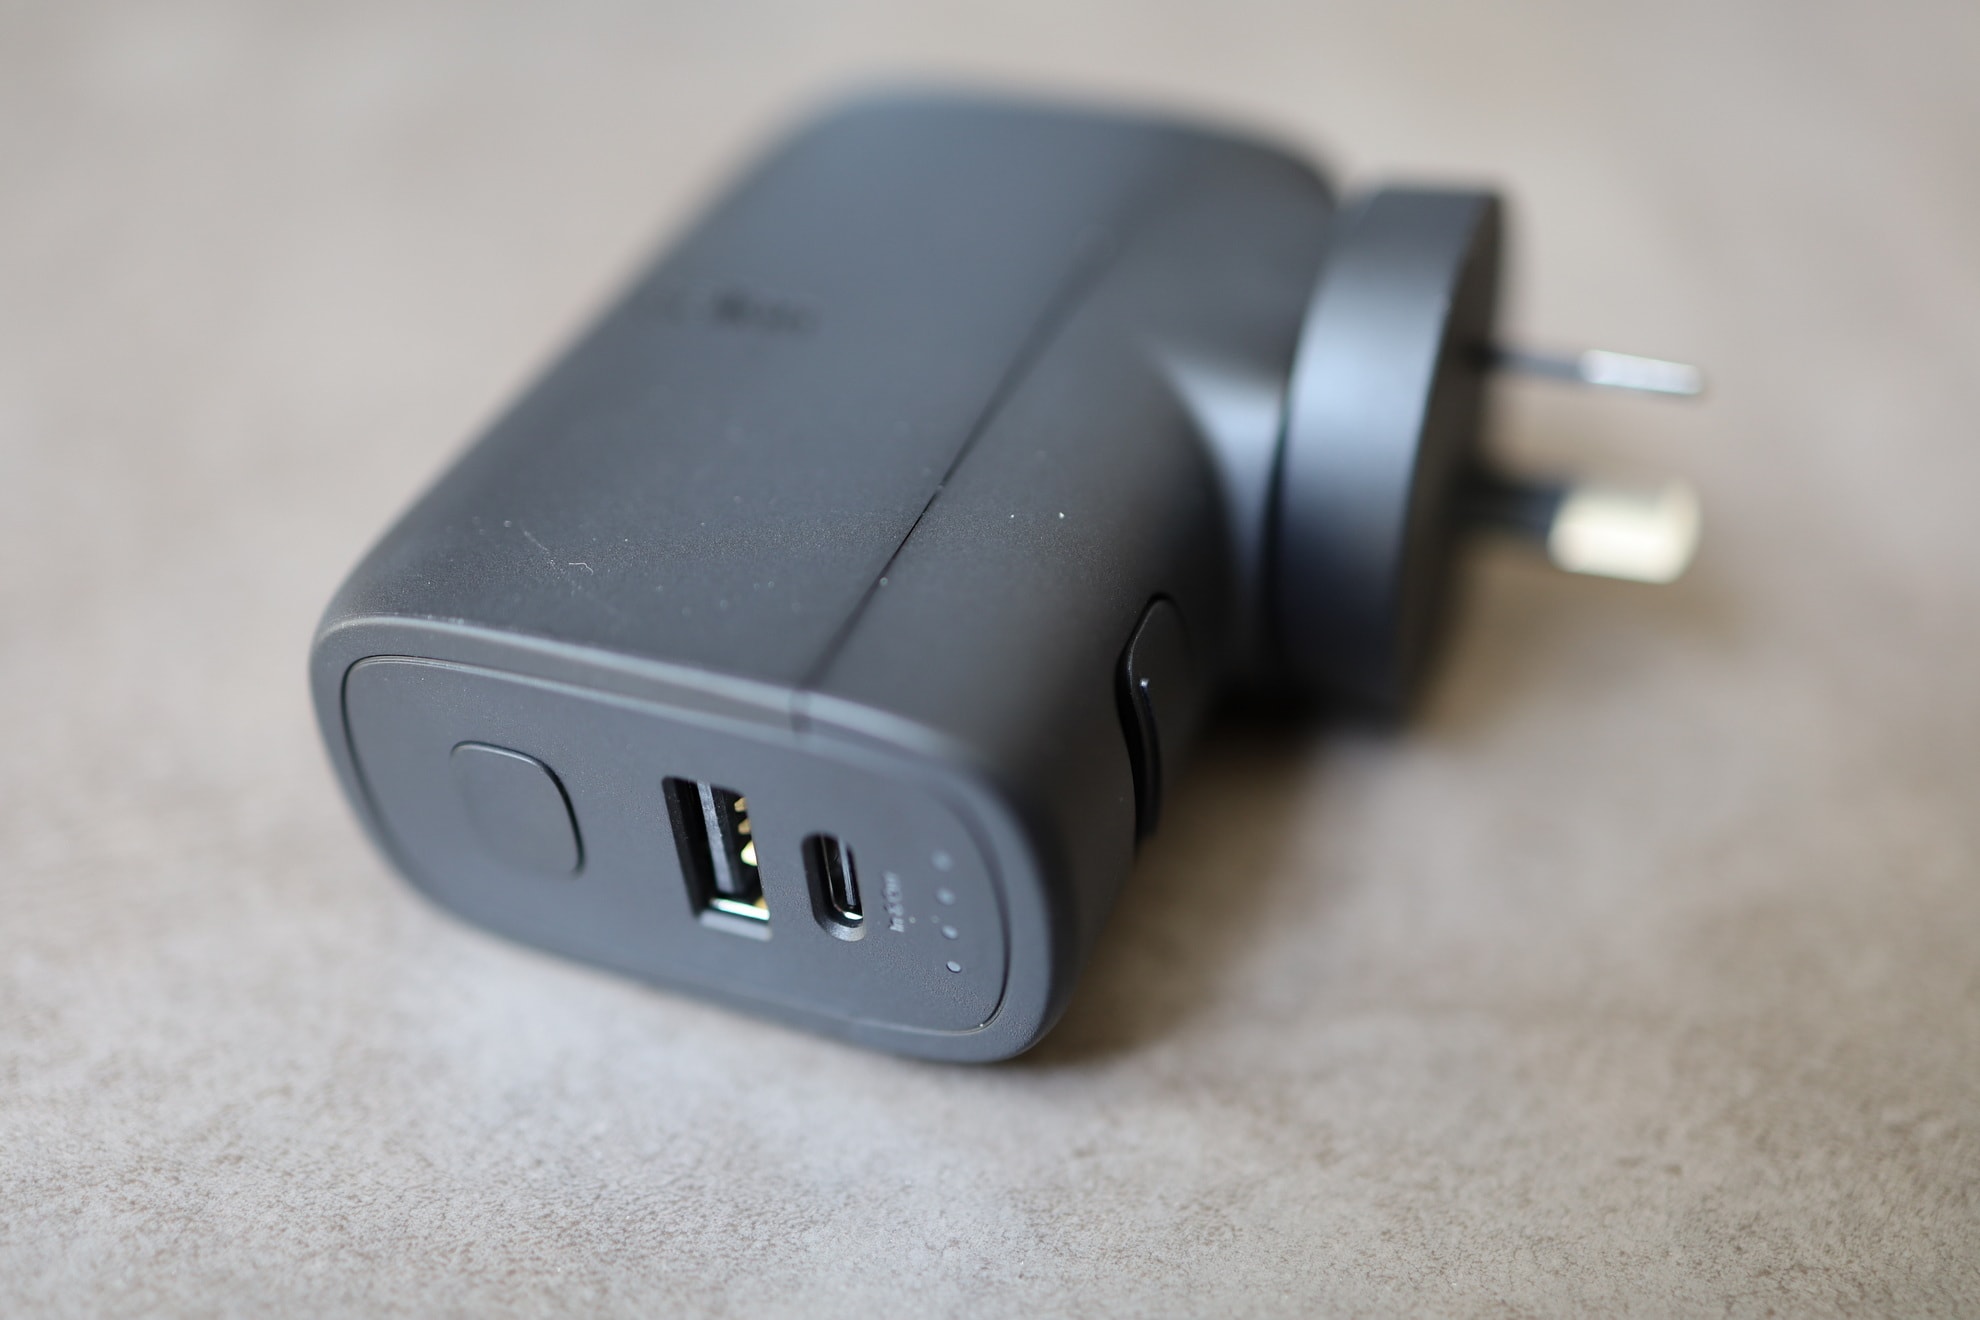 Belkin BoostCharge Hybrid Wall Charger 25W + Power Bank 5K + Travel Adapter Kit Review